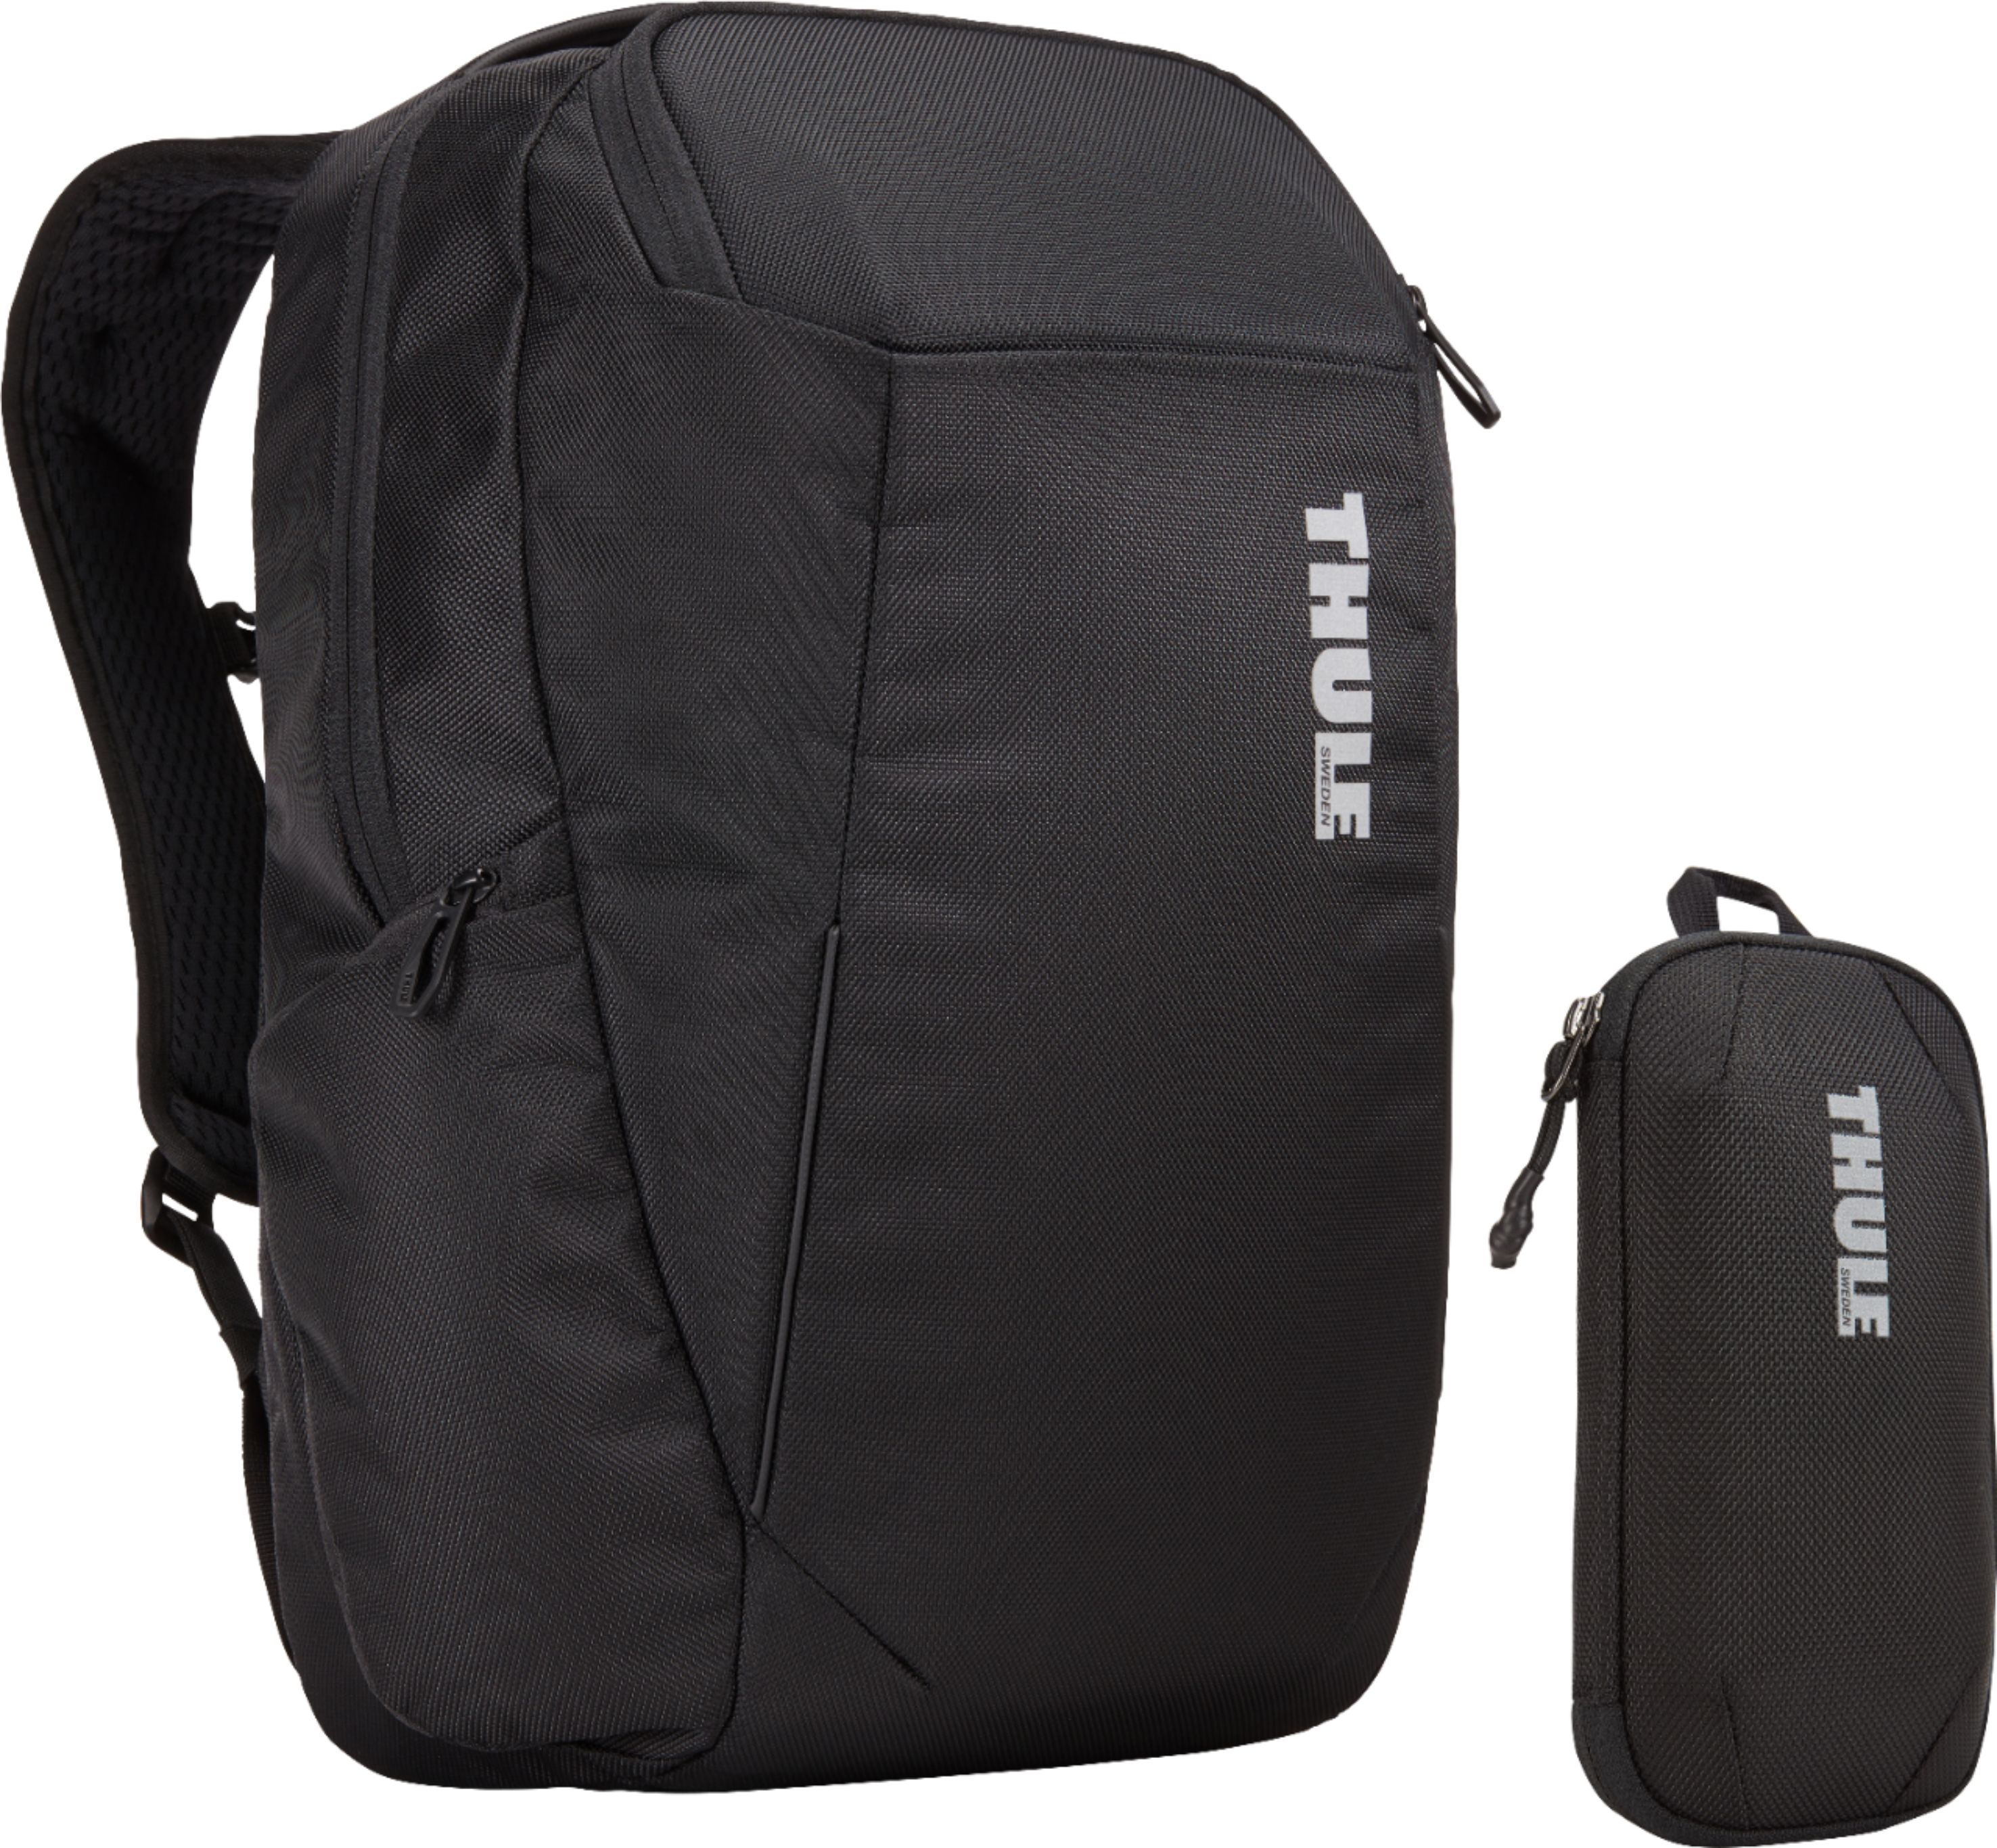 Thule Subterra Backpack 23L, Black : .in: Bags, Wallets and